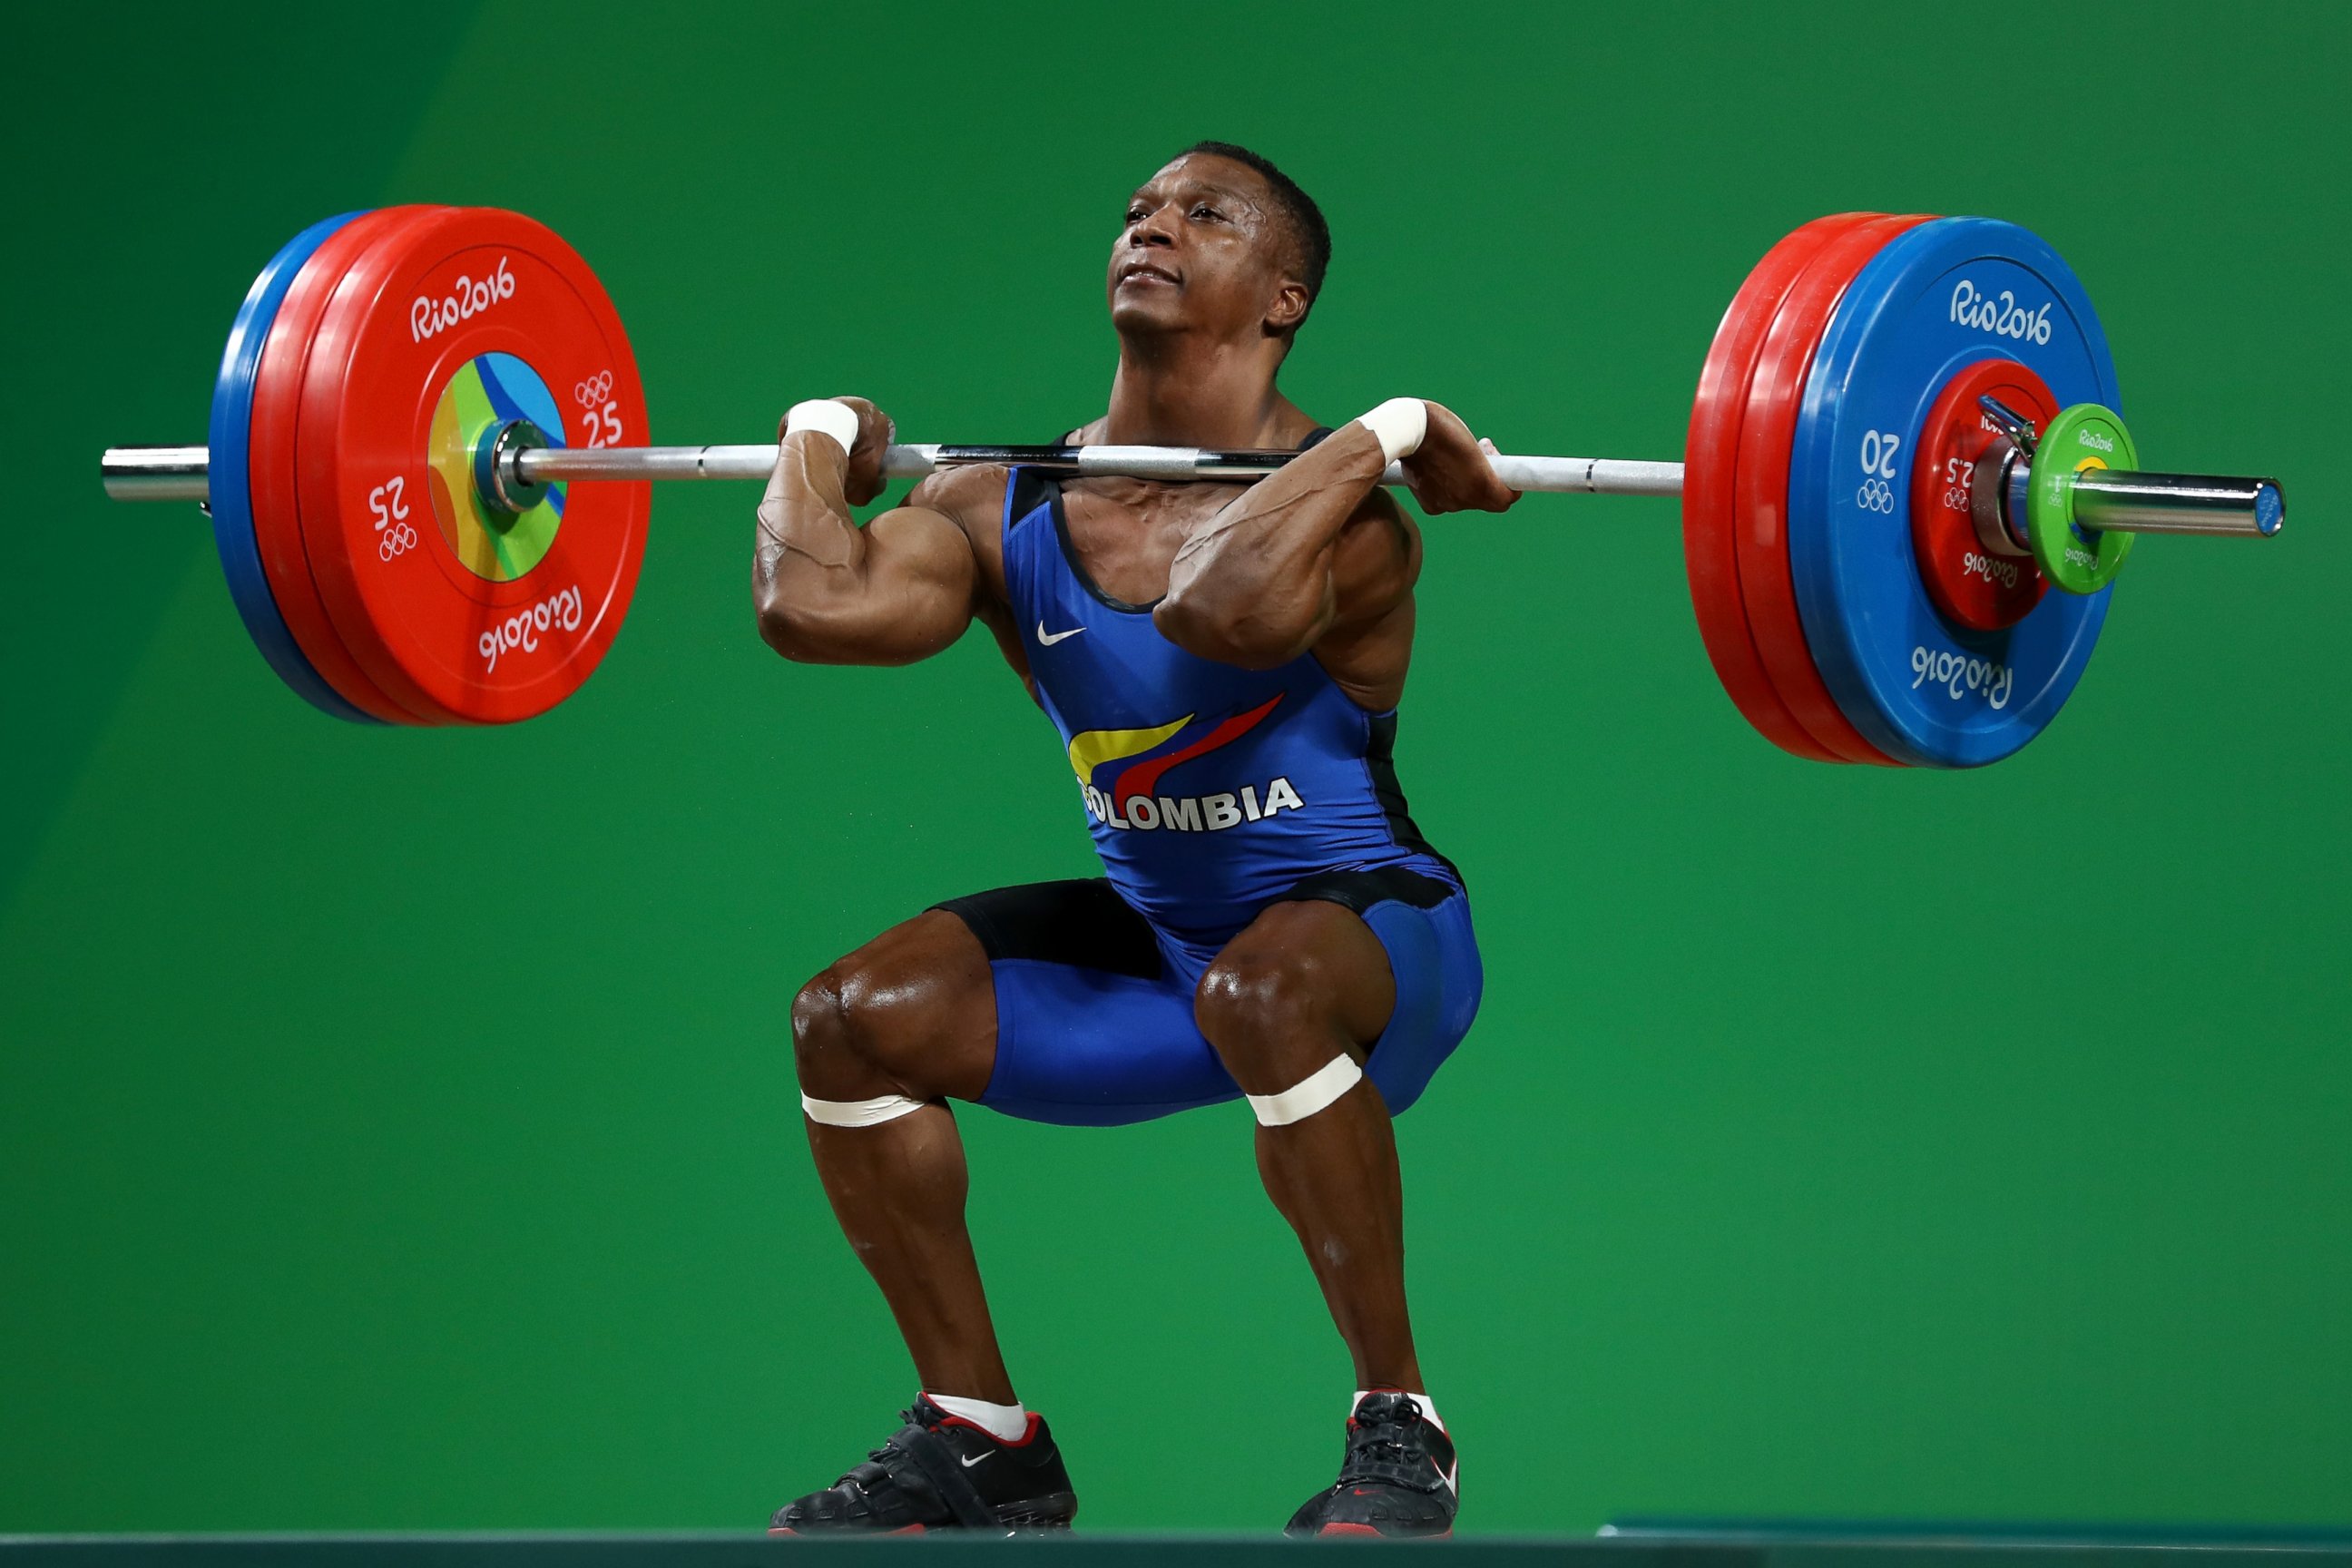 PHOTO: Oscar Albeiro Figueroa Mosquera of Colombia competes during the Men's 62kg Group A weightlifting contest on Day 3 of the Rio 2016 Olympic Games on Aug. 8, 2016 in Rio de Janeiro.